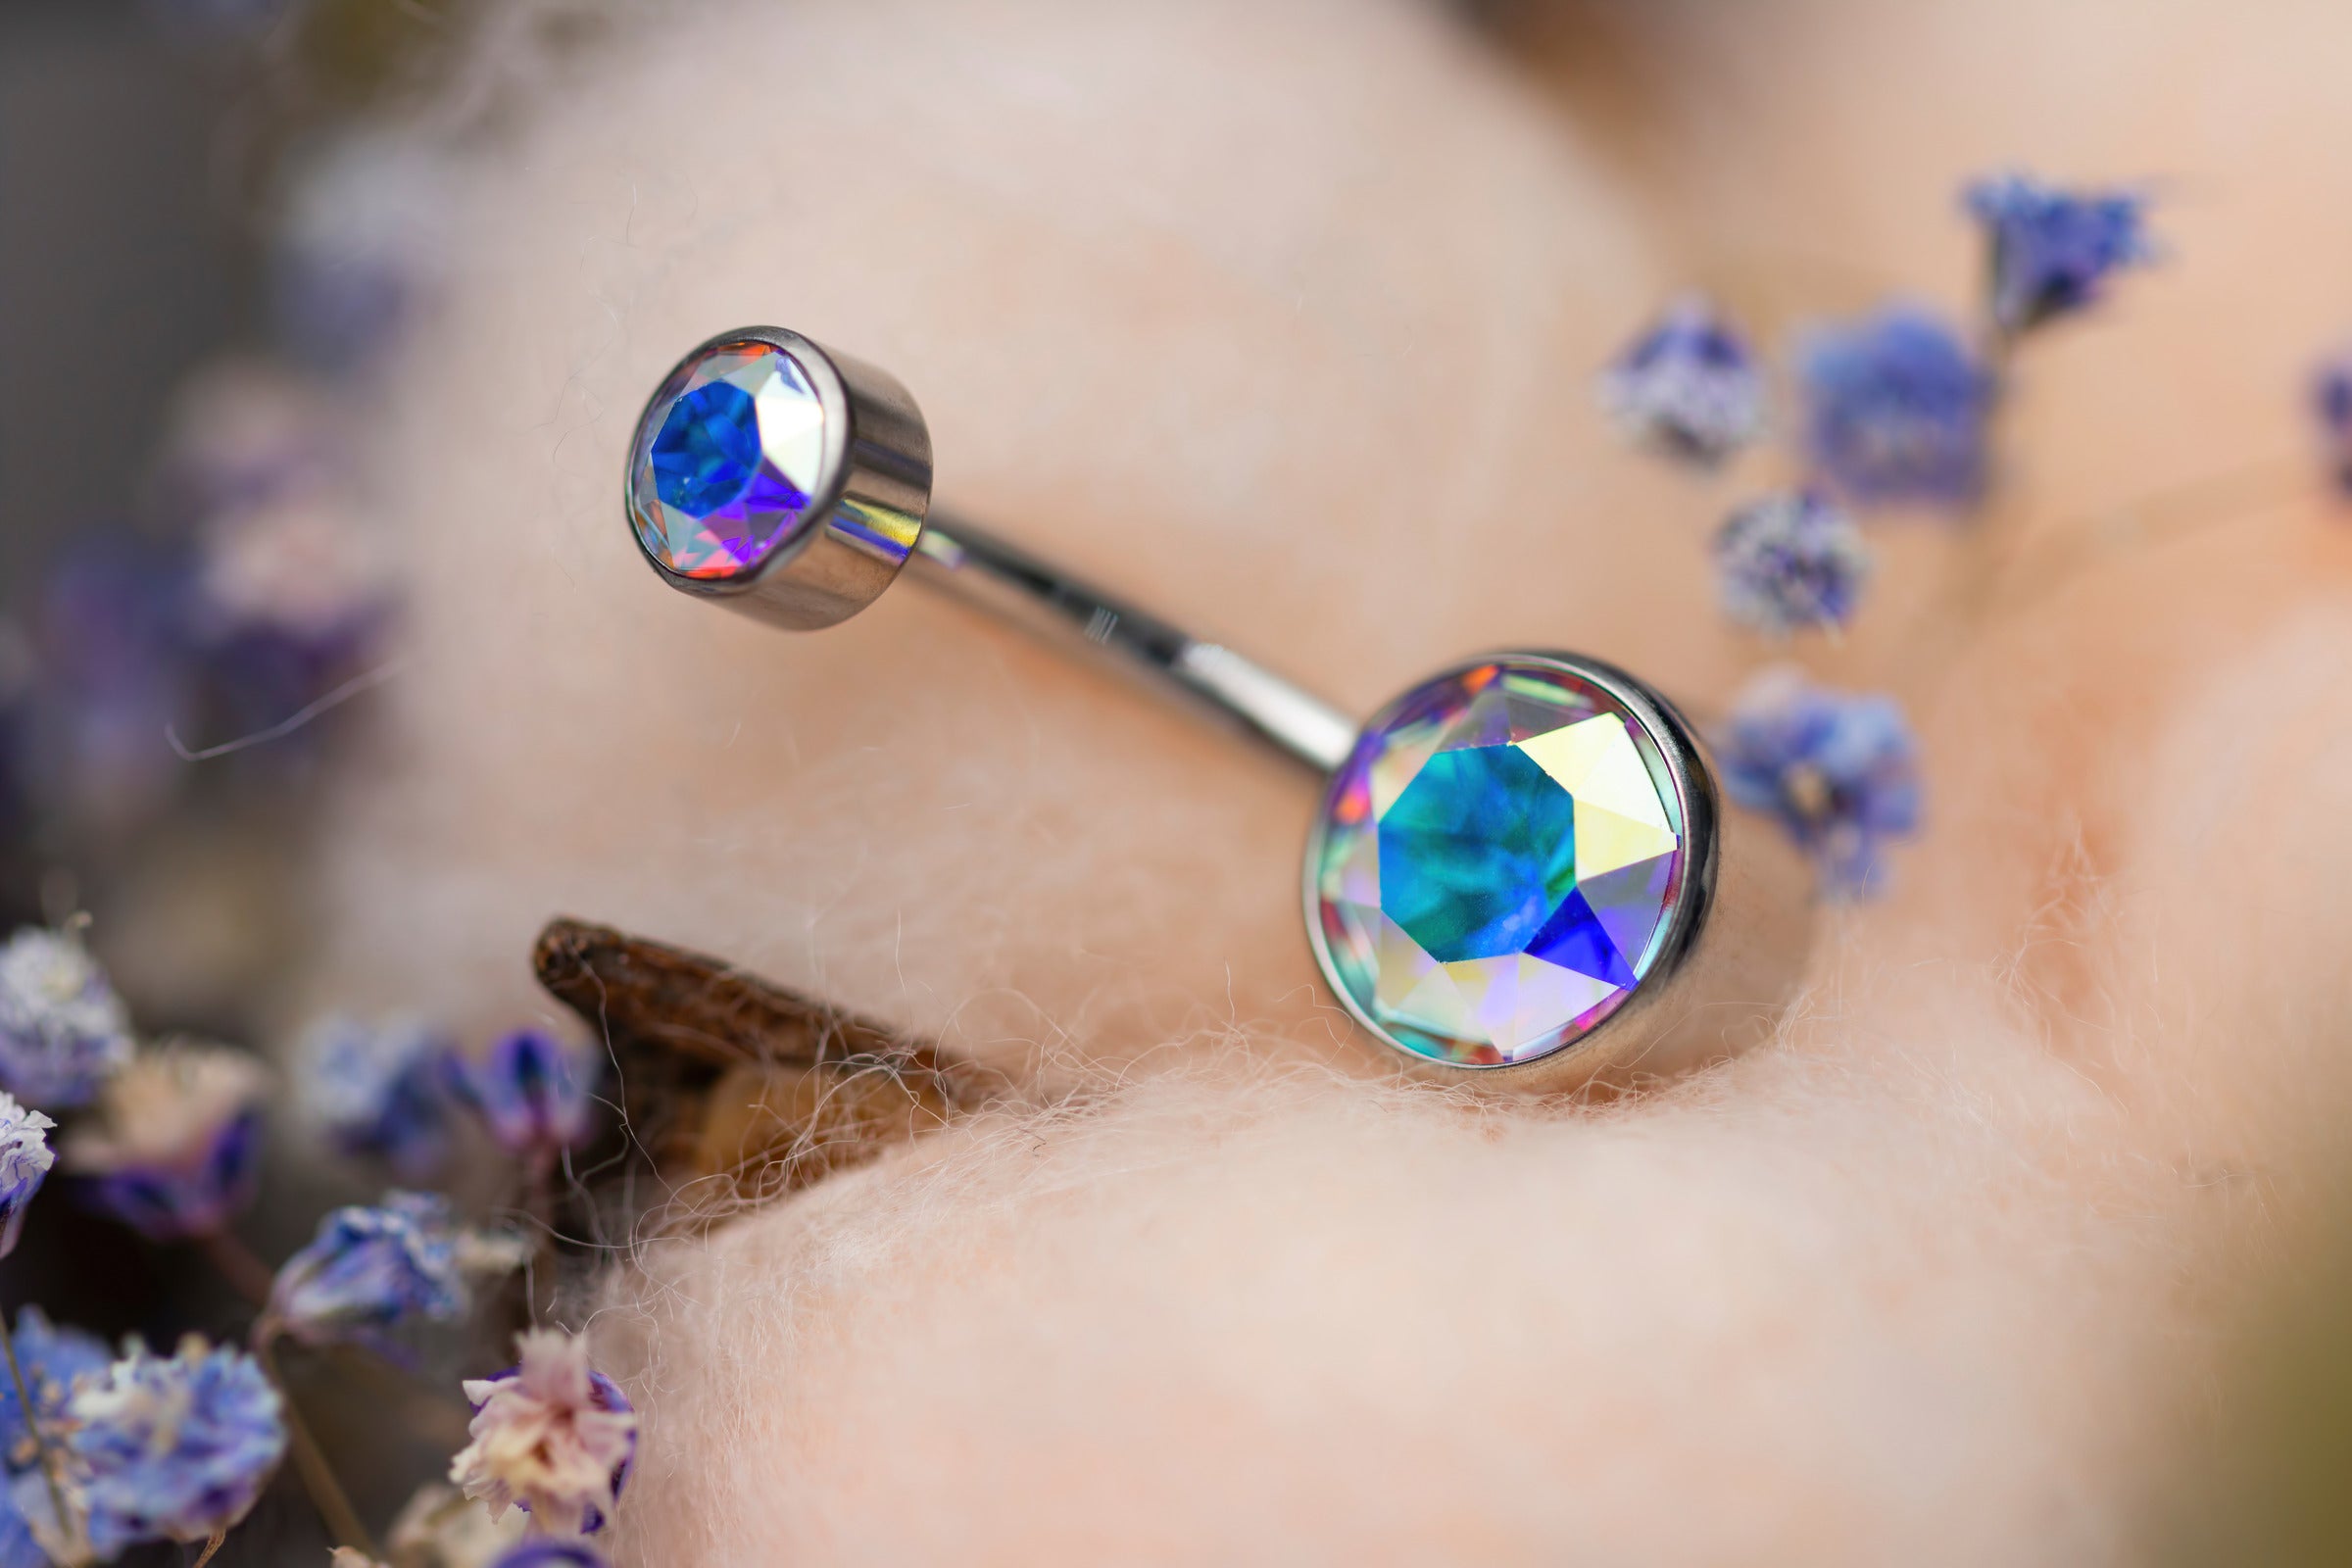 4 Most Important Reasons To Choose the Right Gauge For Your Nipple Piercing